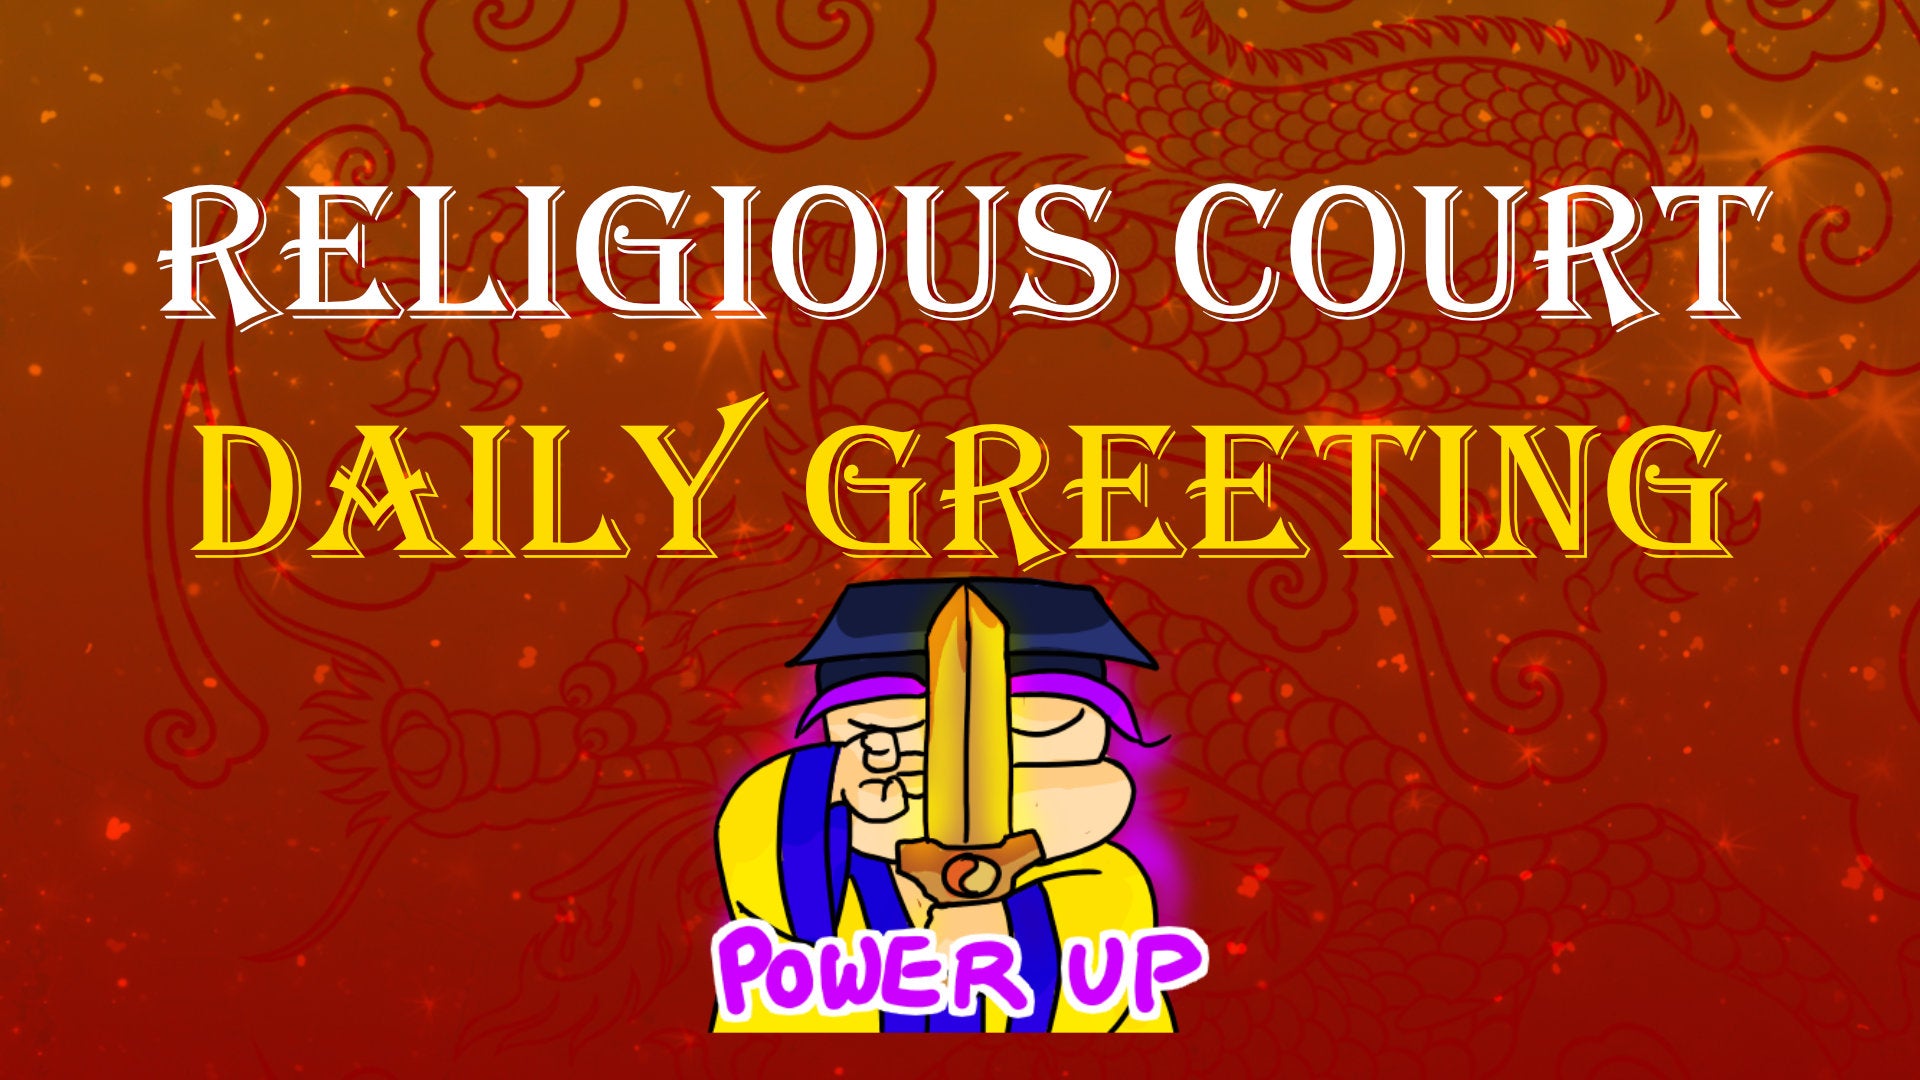 
          Religious Court Daily Greeting
        